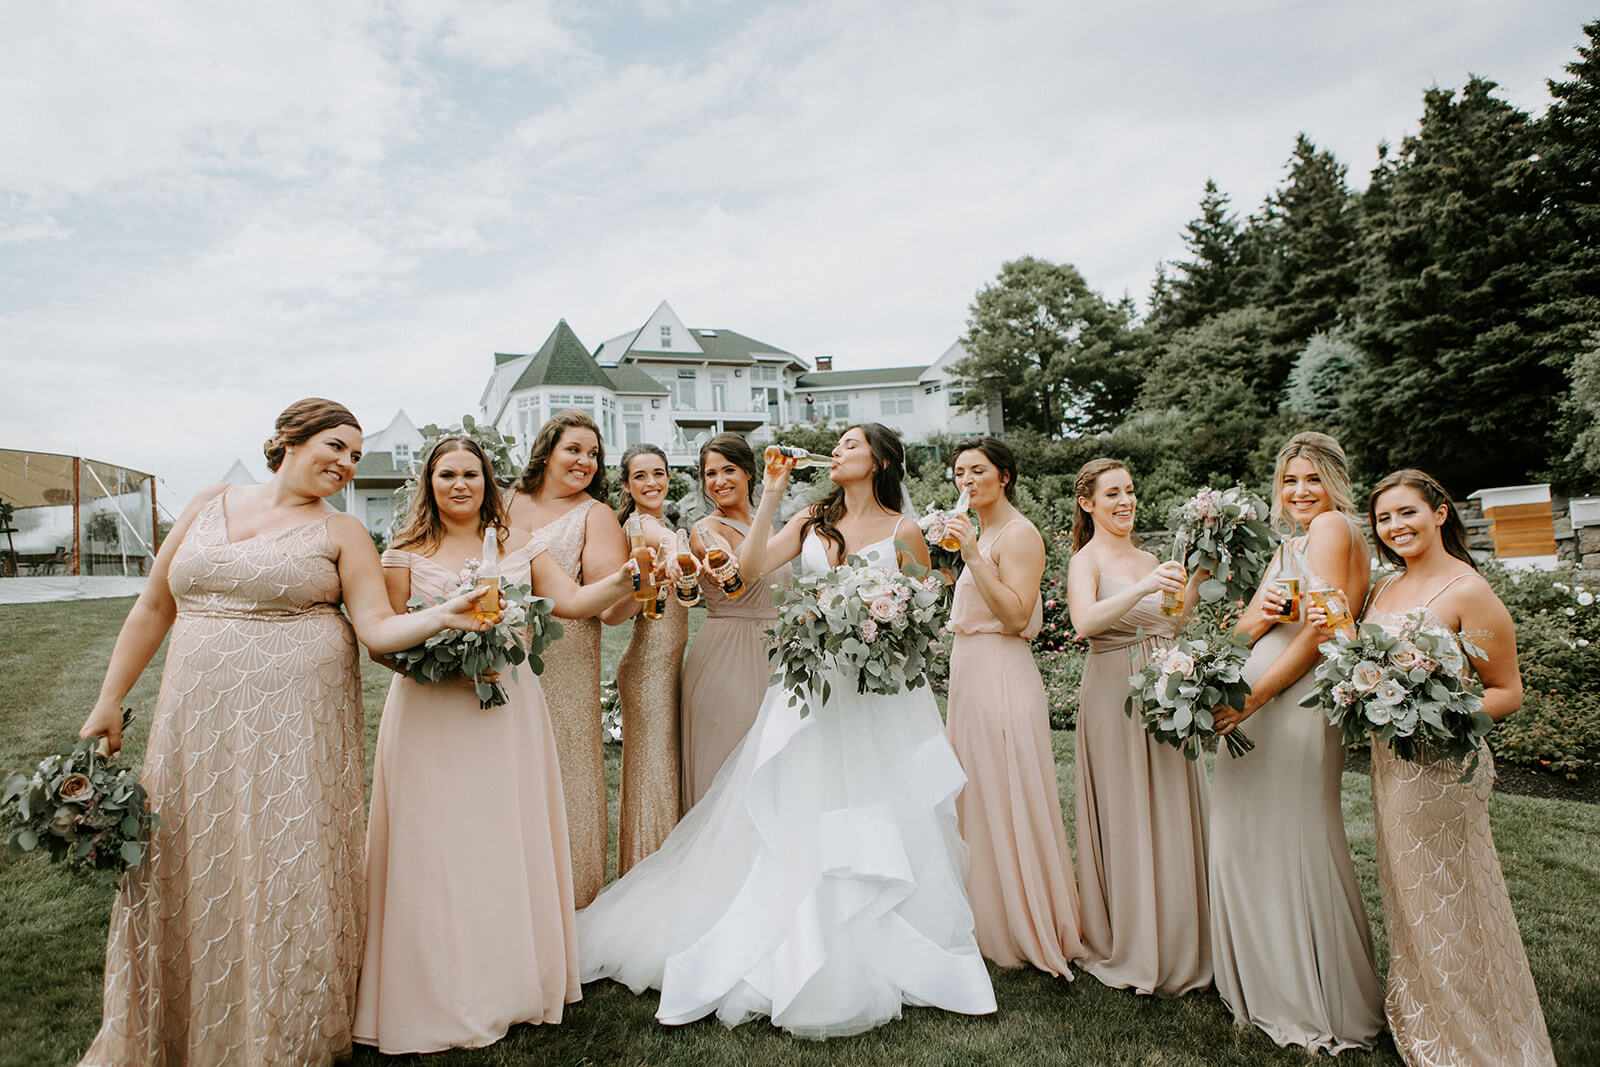 How To Choose Your Bridesmaids: 5 Ways to Choose Without Hurting Feelings